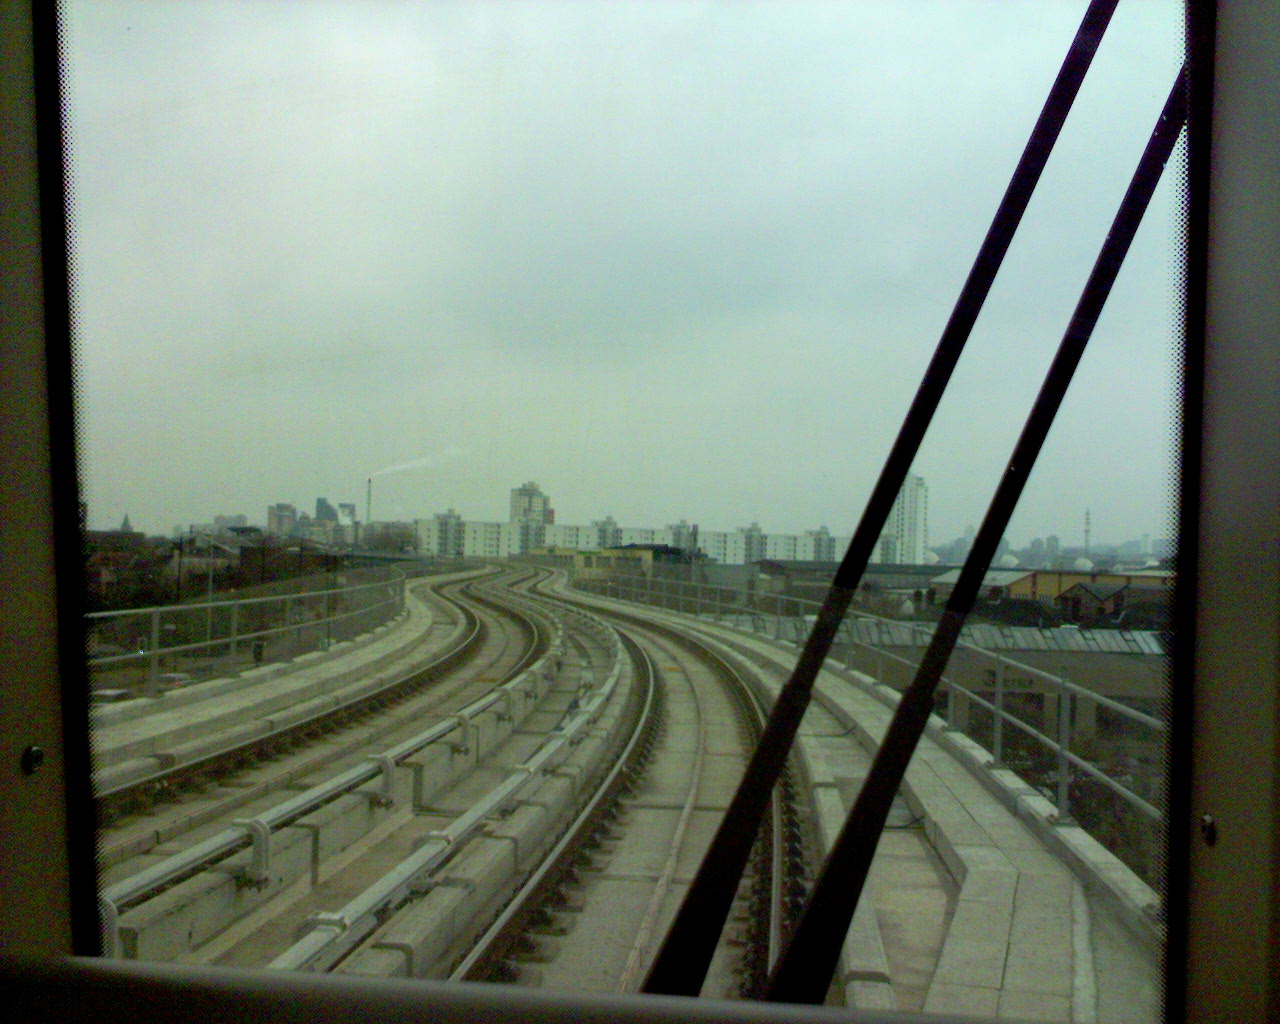 View out the window of DLR - Photo from Furlow Roth's Flickr stream